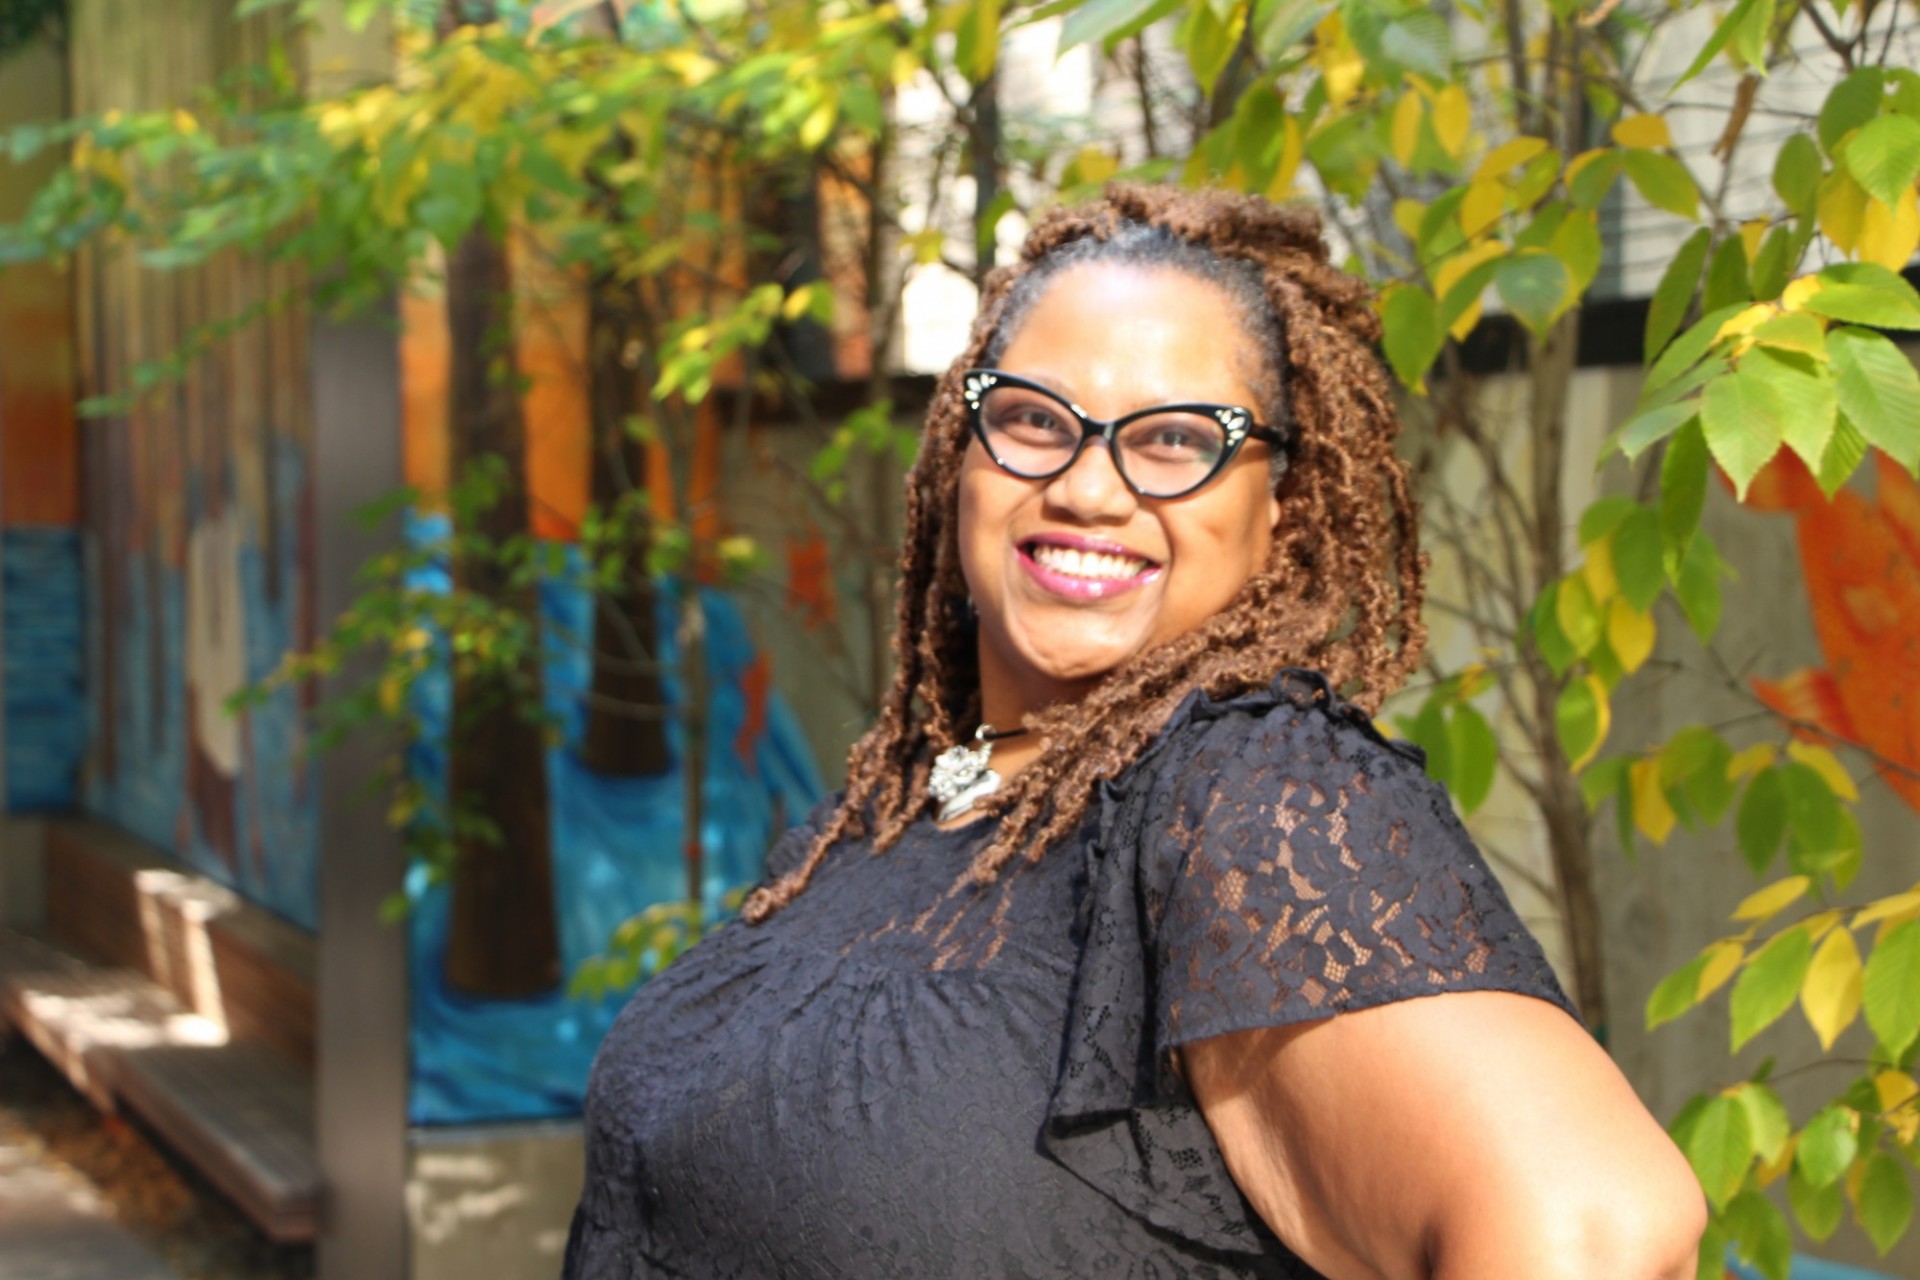 photo of Crystal, a Black woman smiling in a black shirt and glasses, in front of some trees 